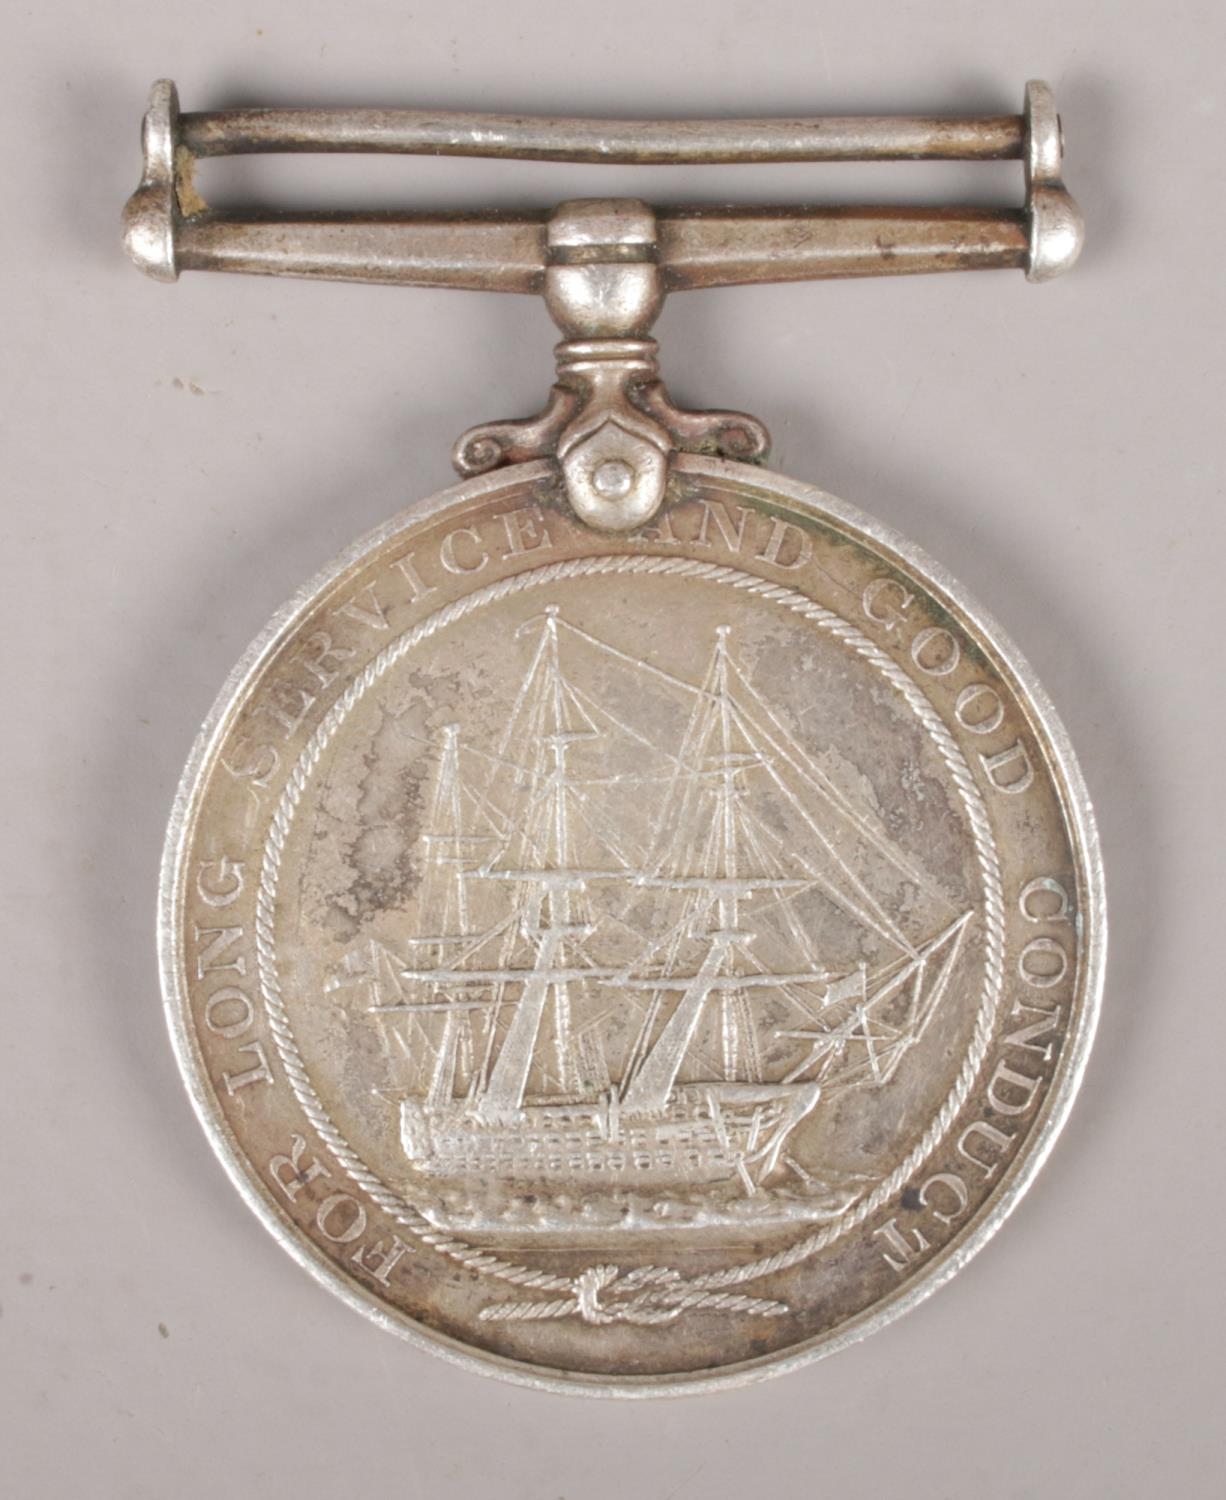 A George V Royal Navy long service medal, presented to T.H. Bray, HMS Bridgewater.